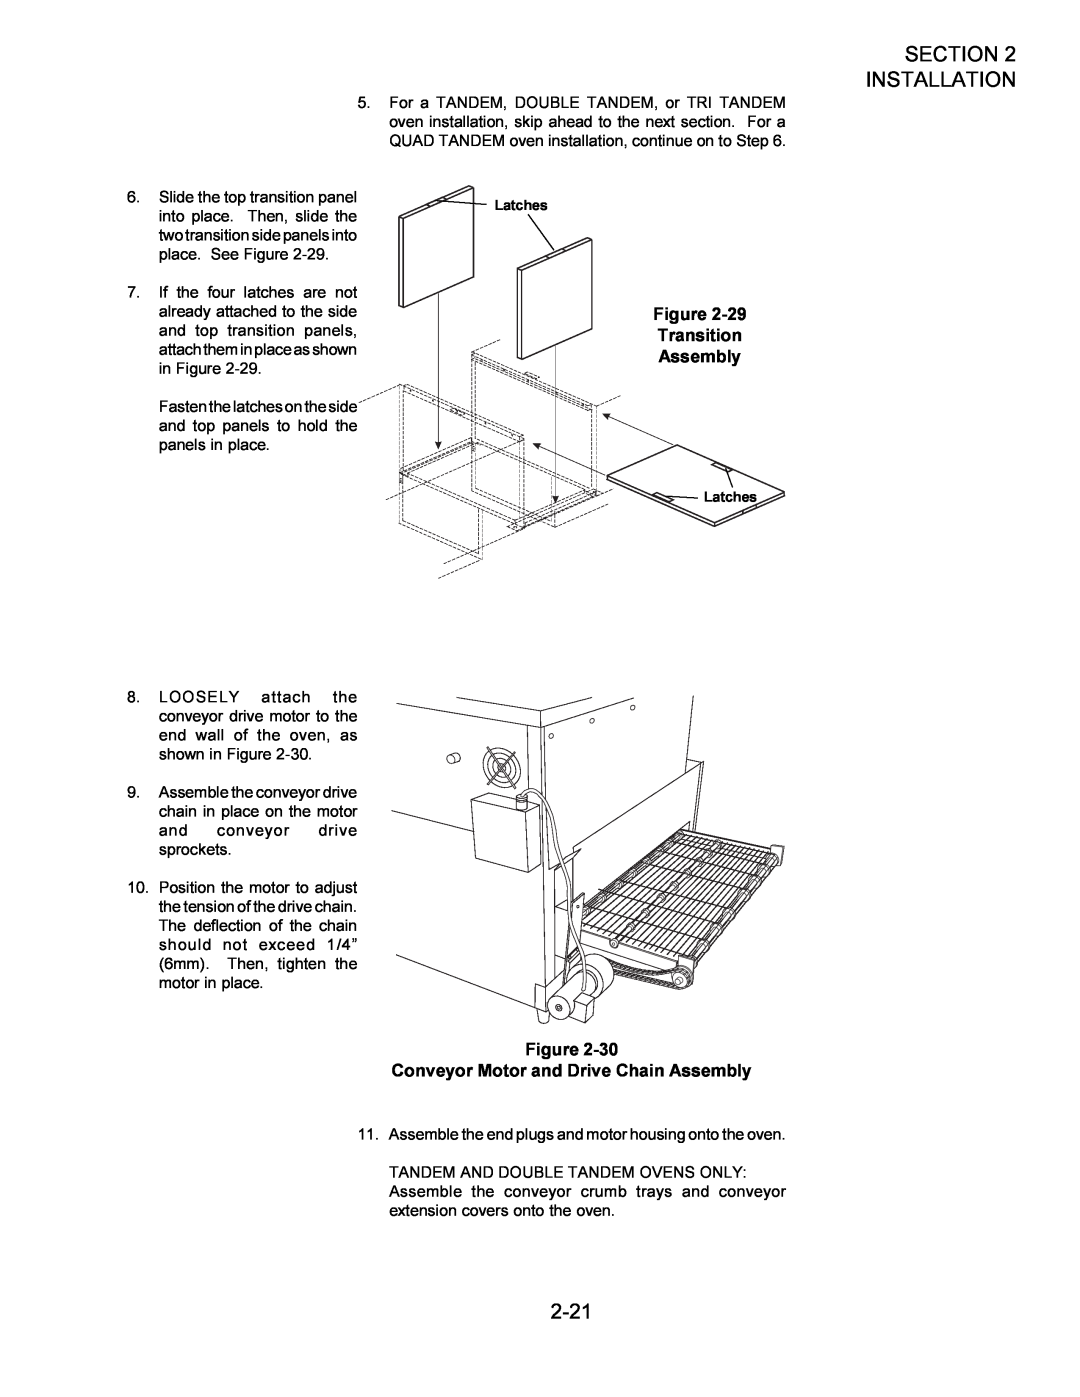 Middleby Marshall Oven owner manual 2-21, Transition Assembly, Conveyor Motor and Drive Chain Assembly, Installation 